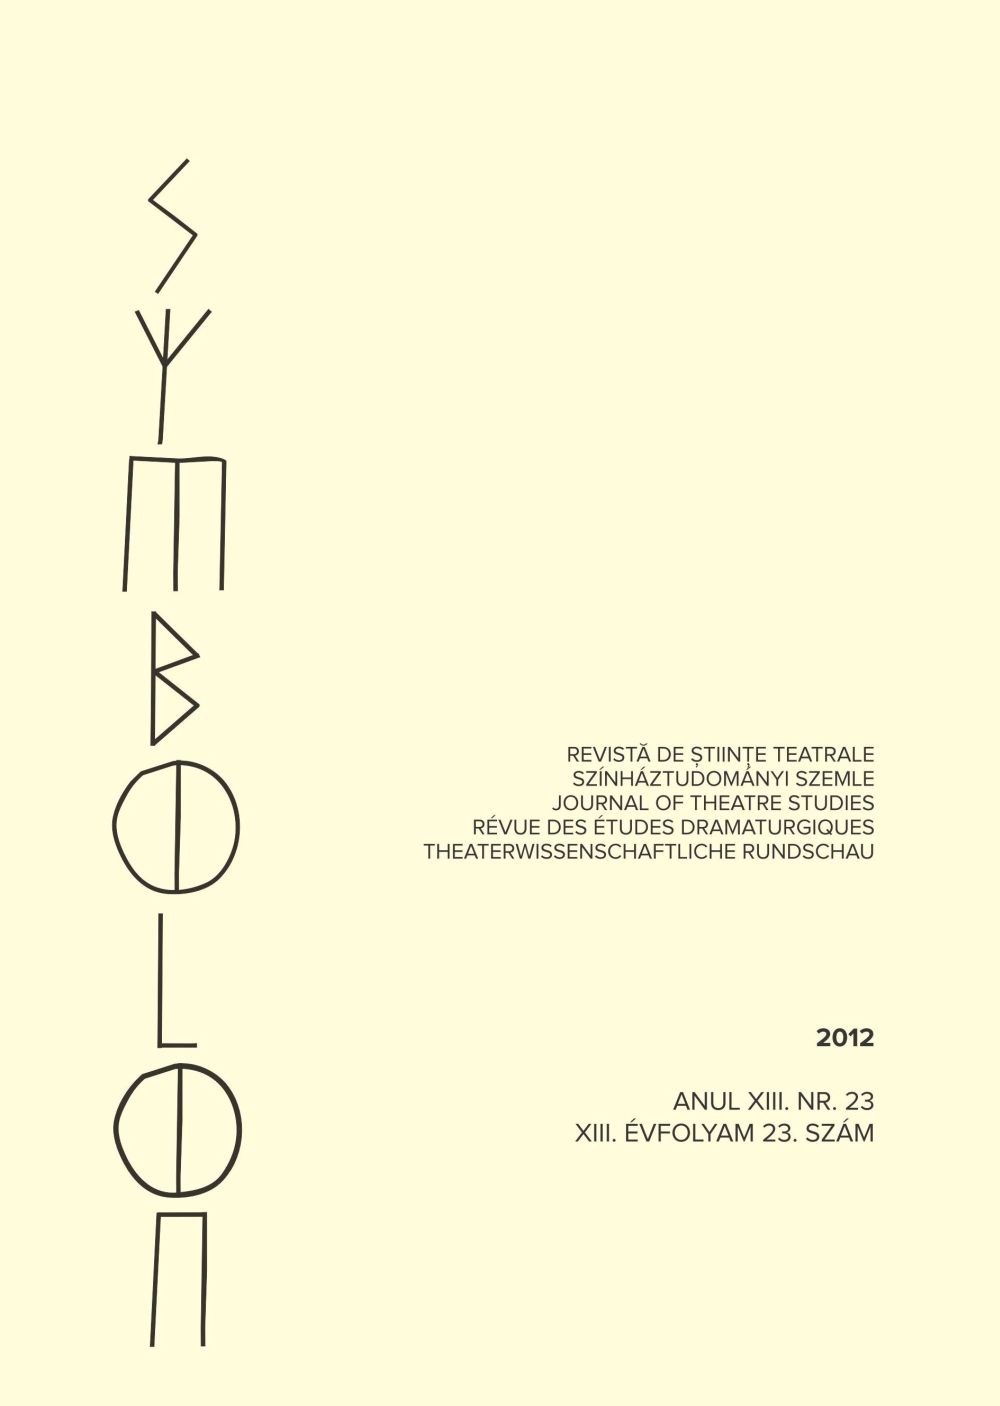 The Possible Psychological Effects of Subtitles (Provided in Second Language) on the Theatre Play’s Bilingual Viewer – Psychological Hypothesis Cover Image